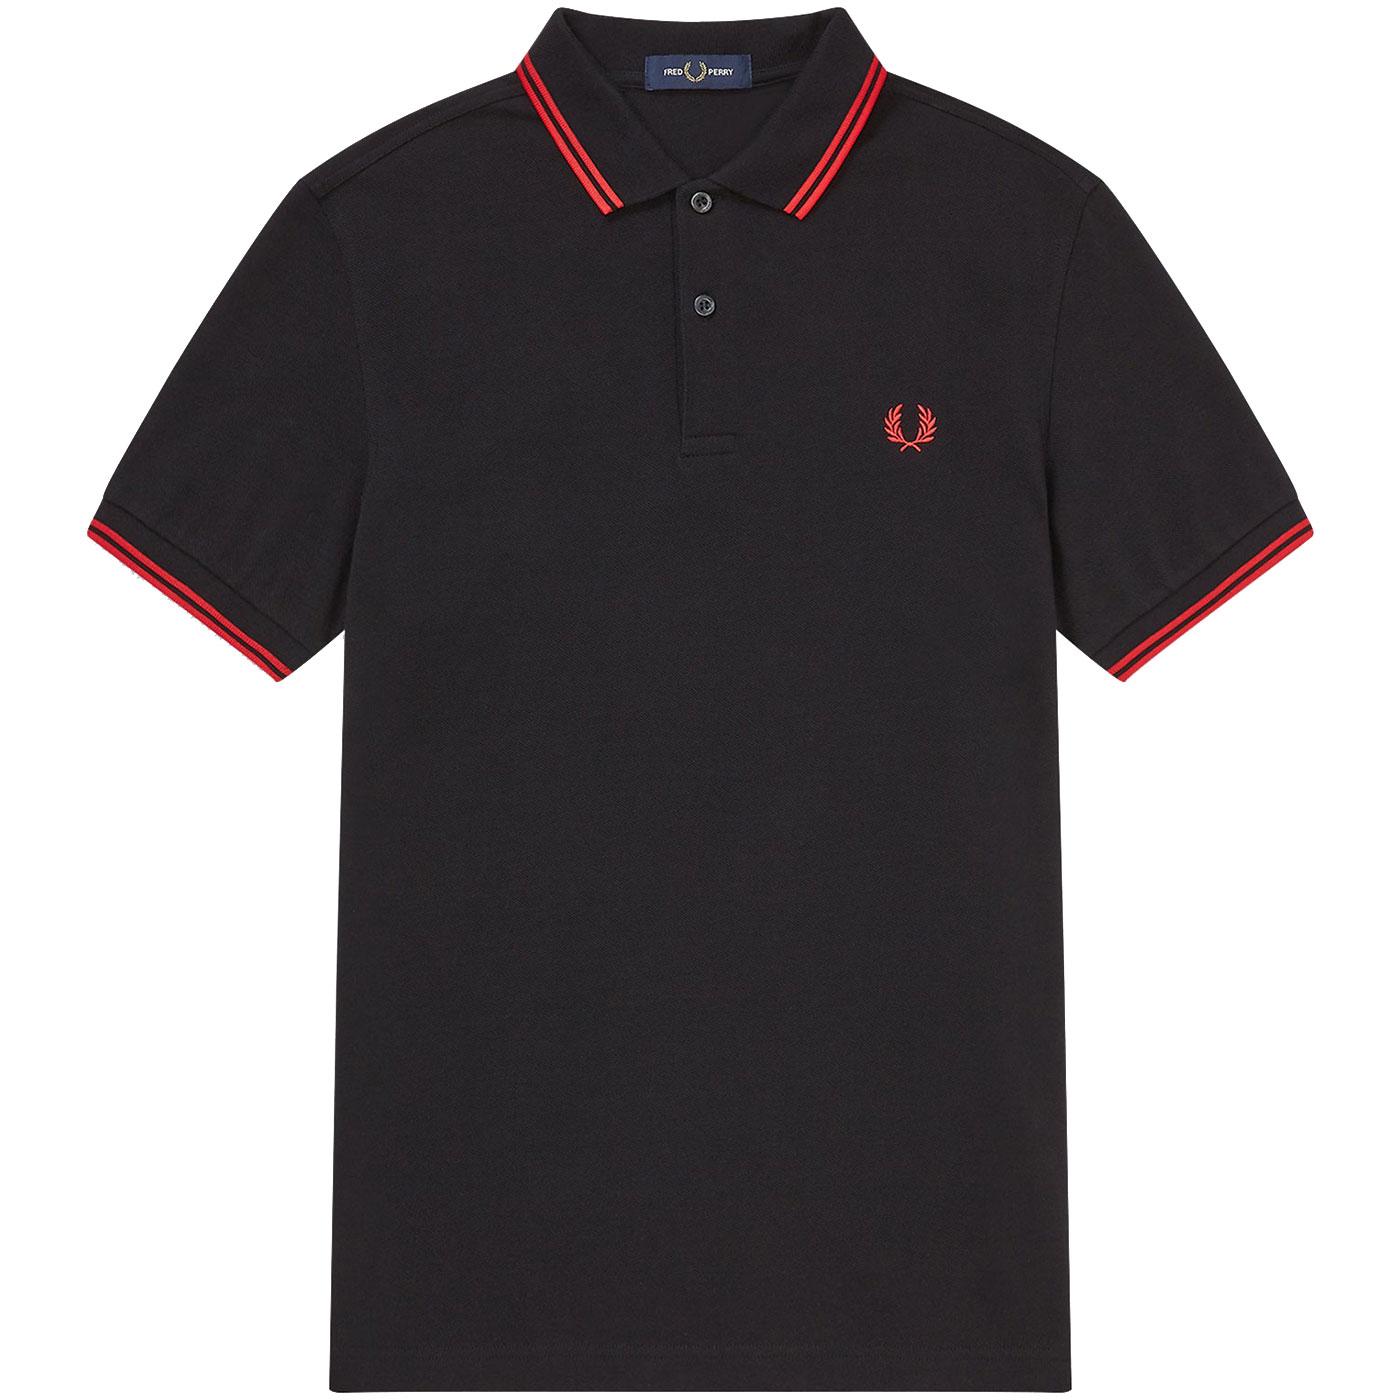 FRED PERRY M3600 Mod Twin Tipped Polo Shirt B/R/R